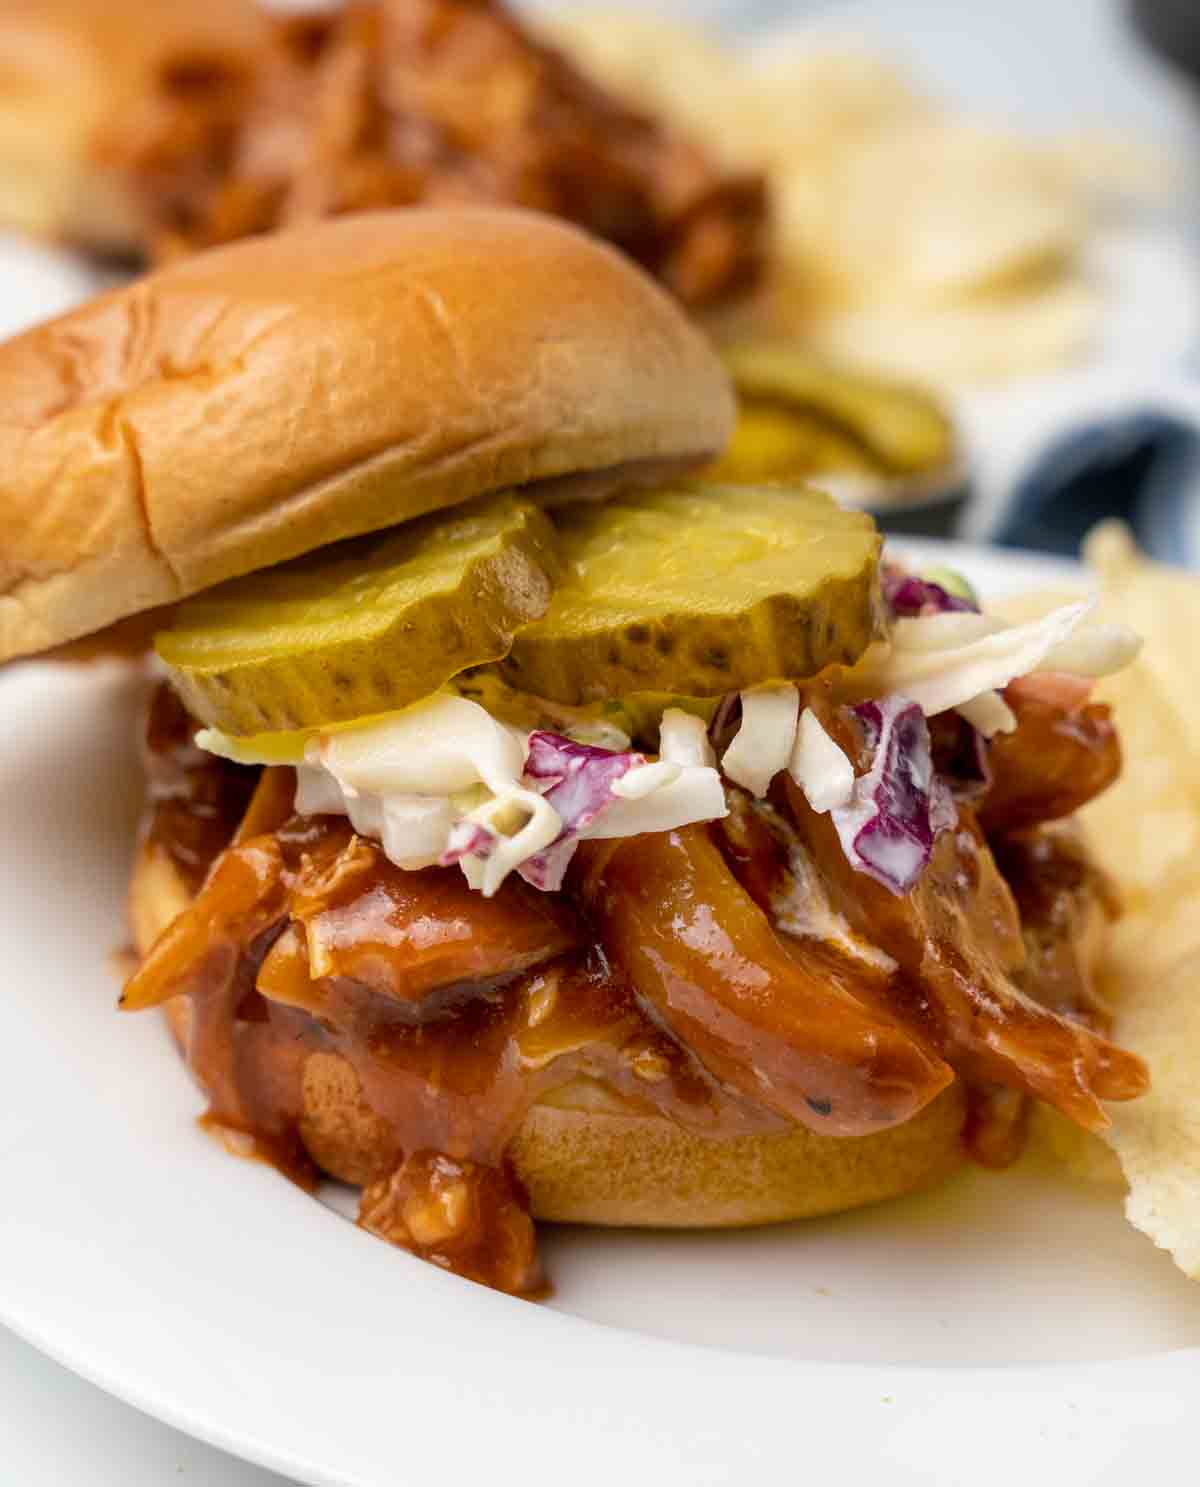 bbq chicken sandwich with cole slaw and pickles on bun.